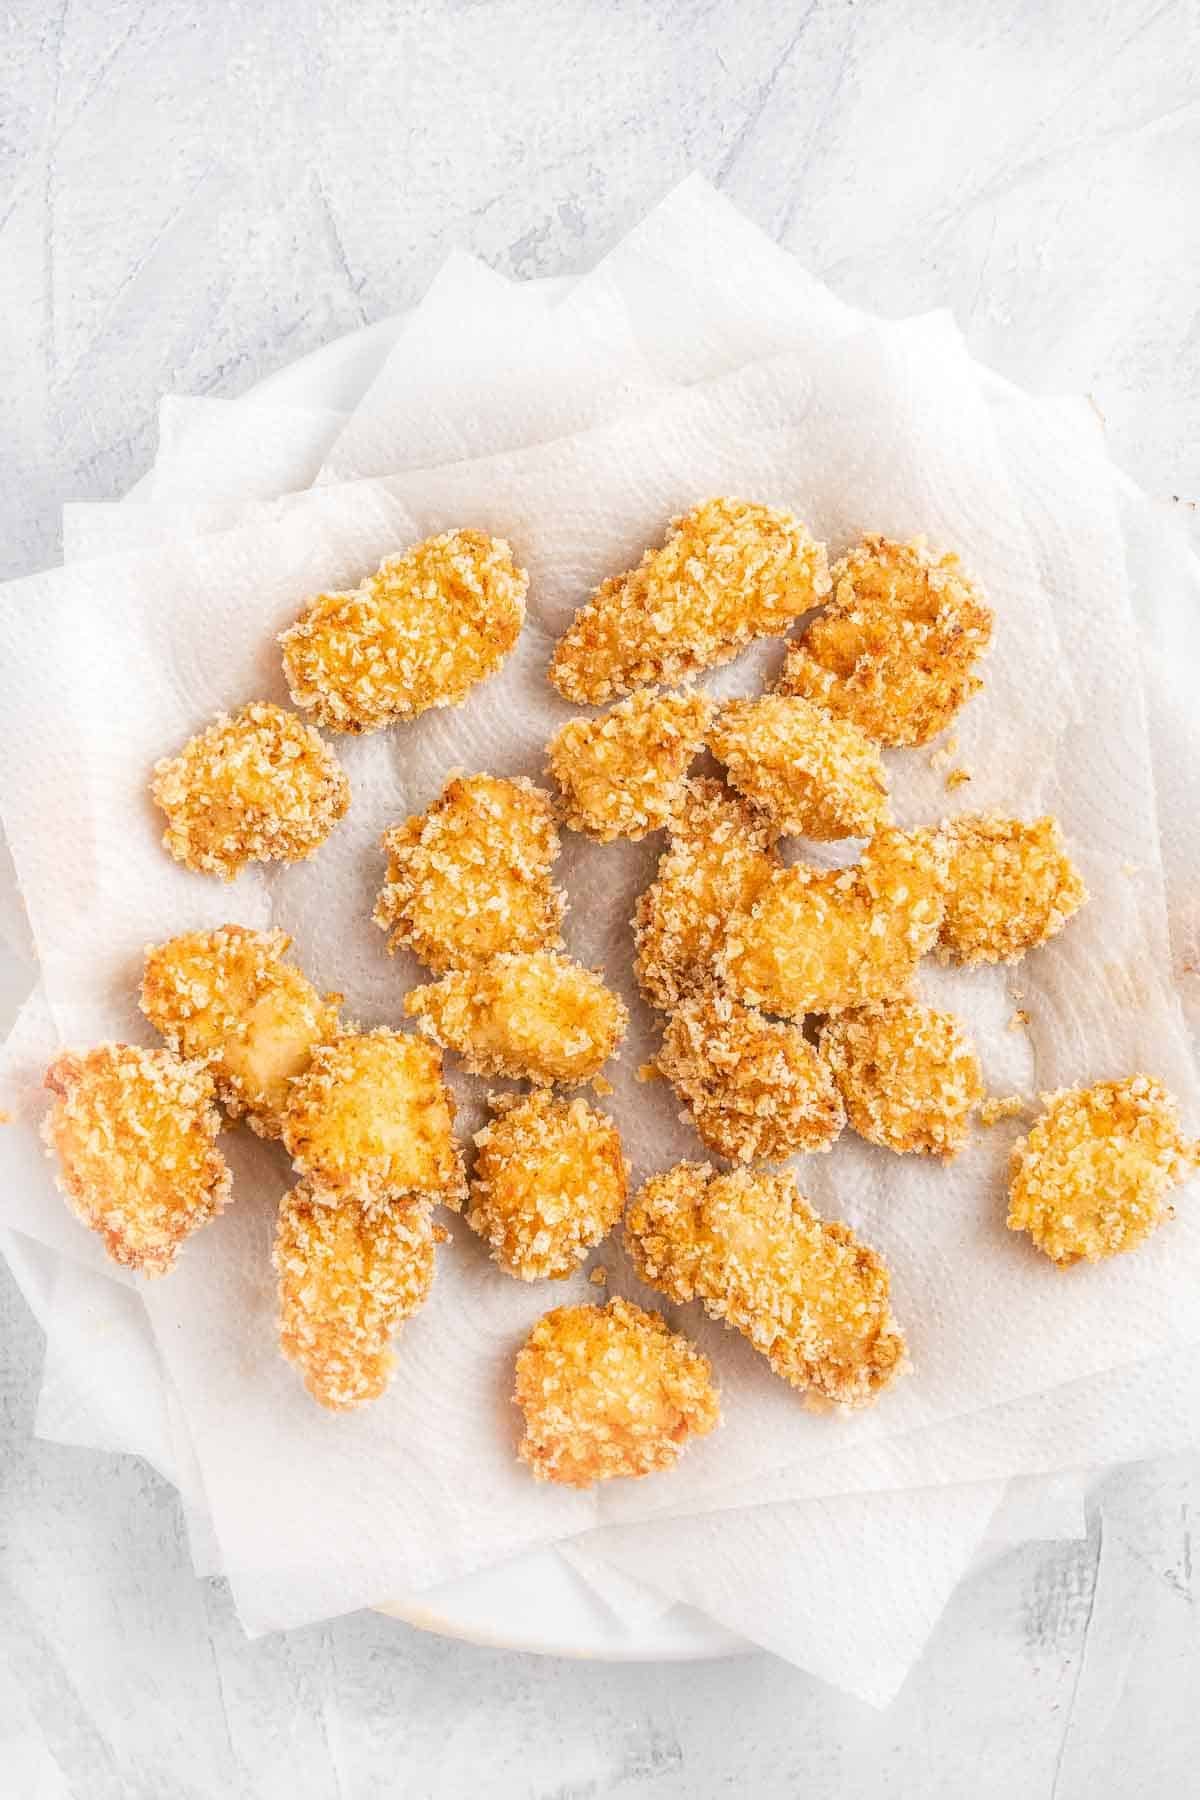 crispy fried chicken nuggets on white paper towels.